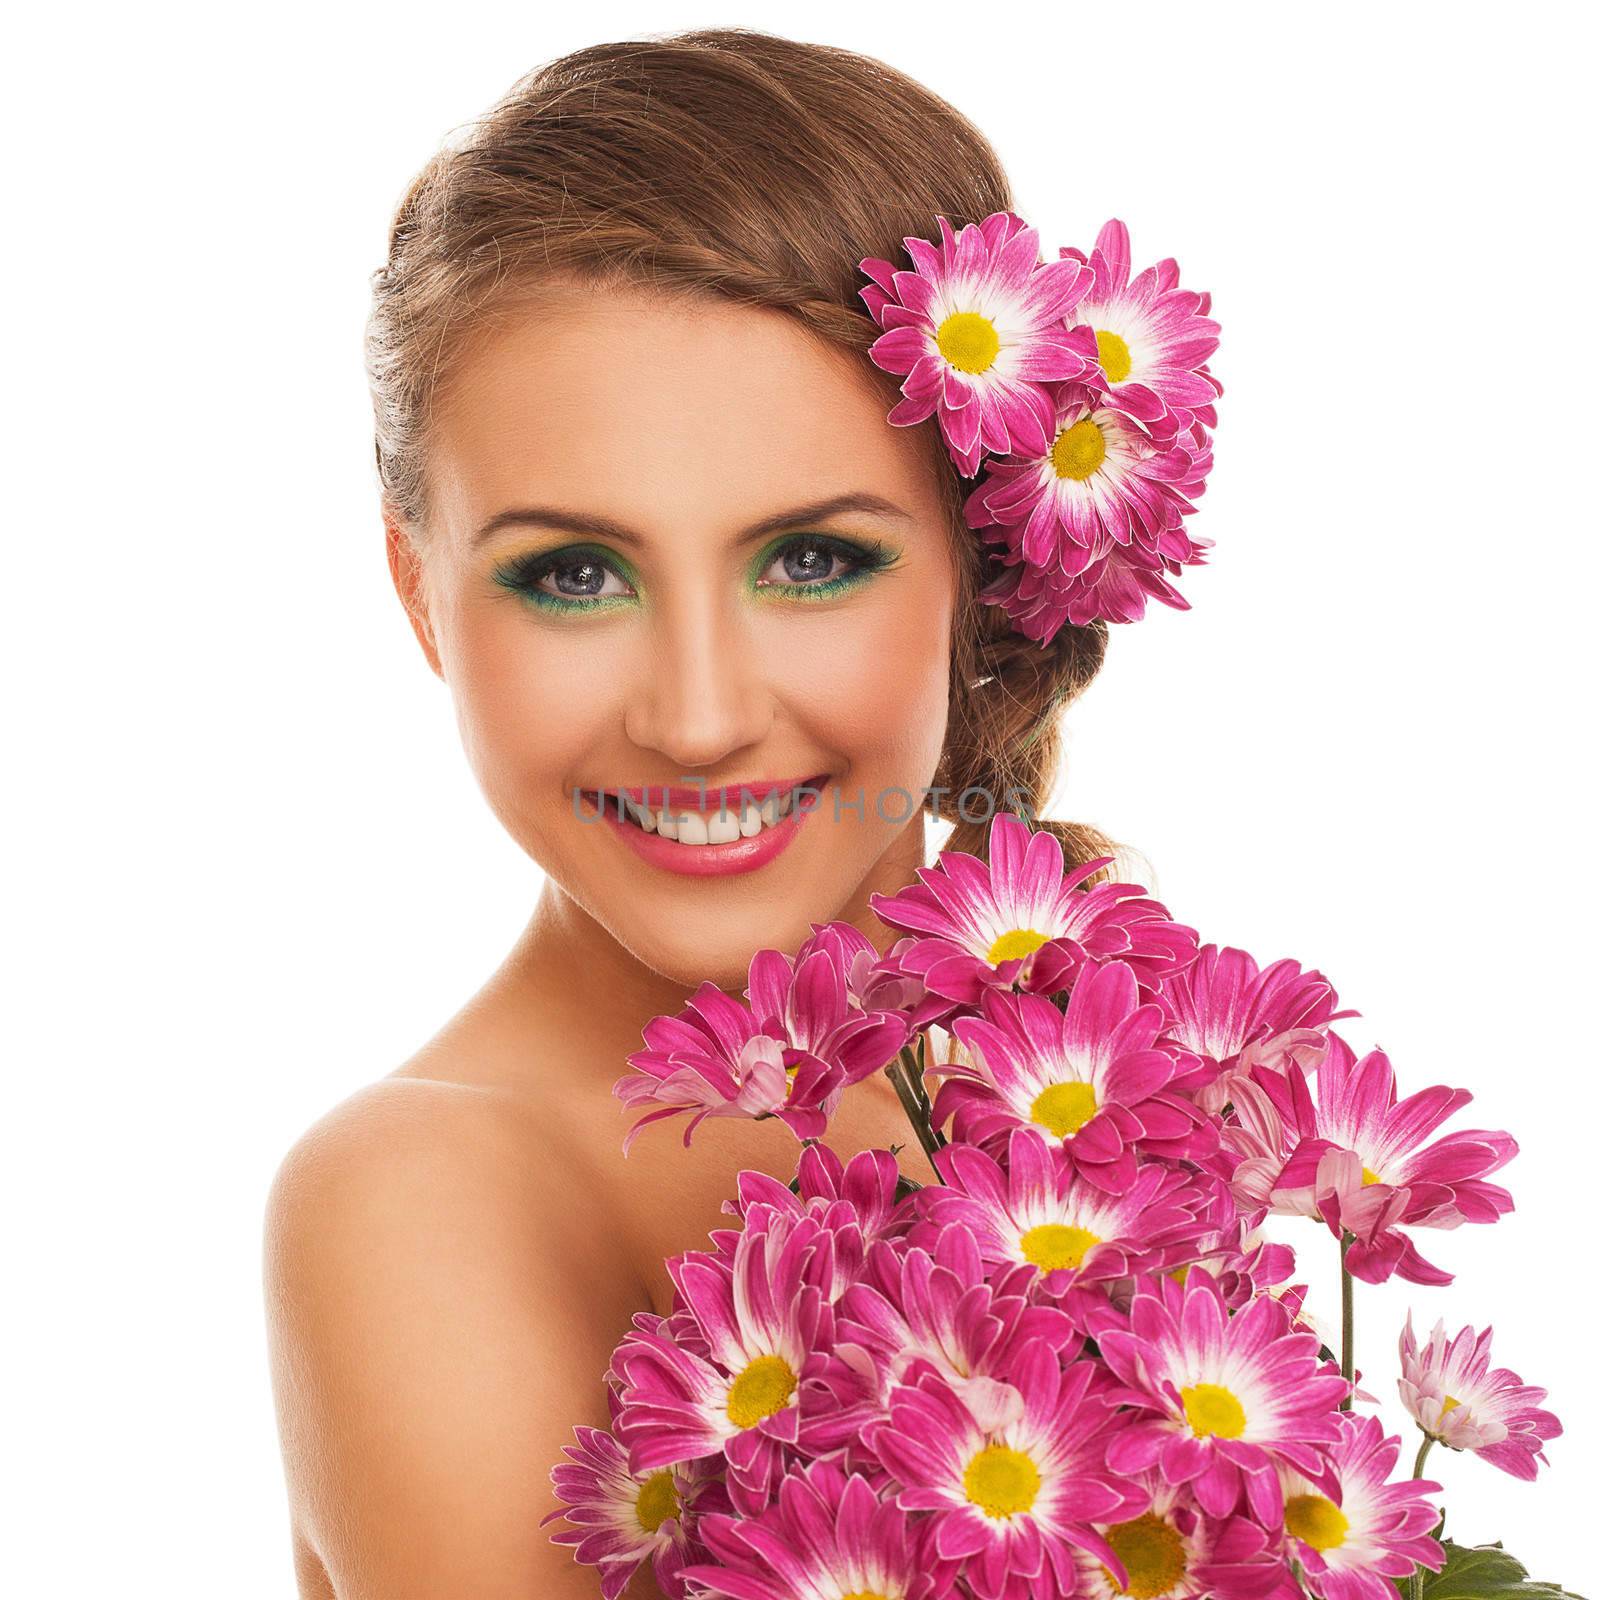 Beautiful young caucasian woman with flowers in hair isolated over white background